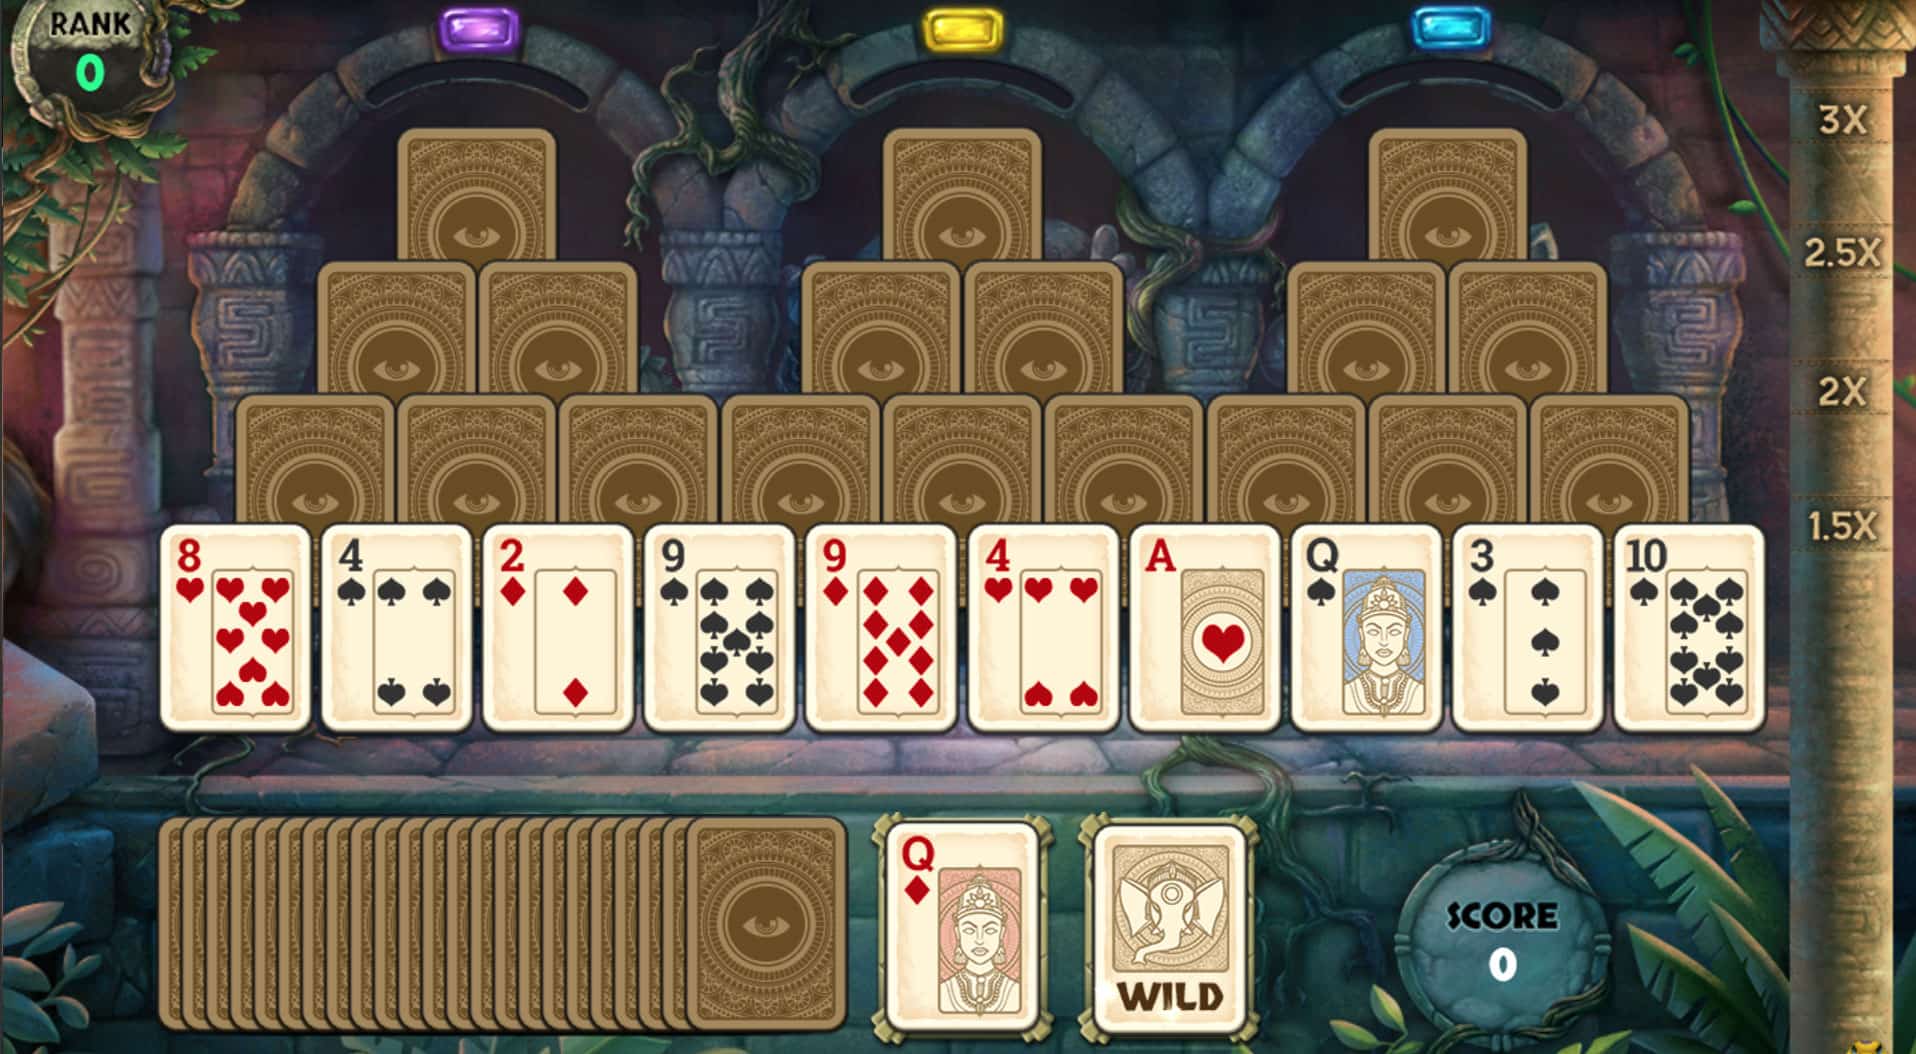 free online tri towers solitaire card games